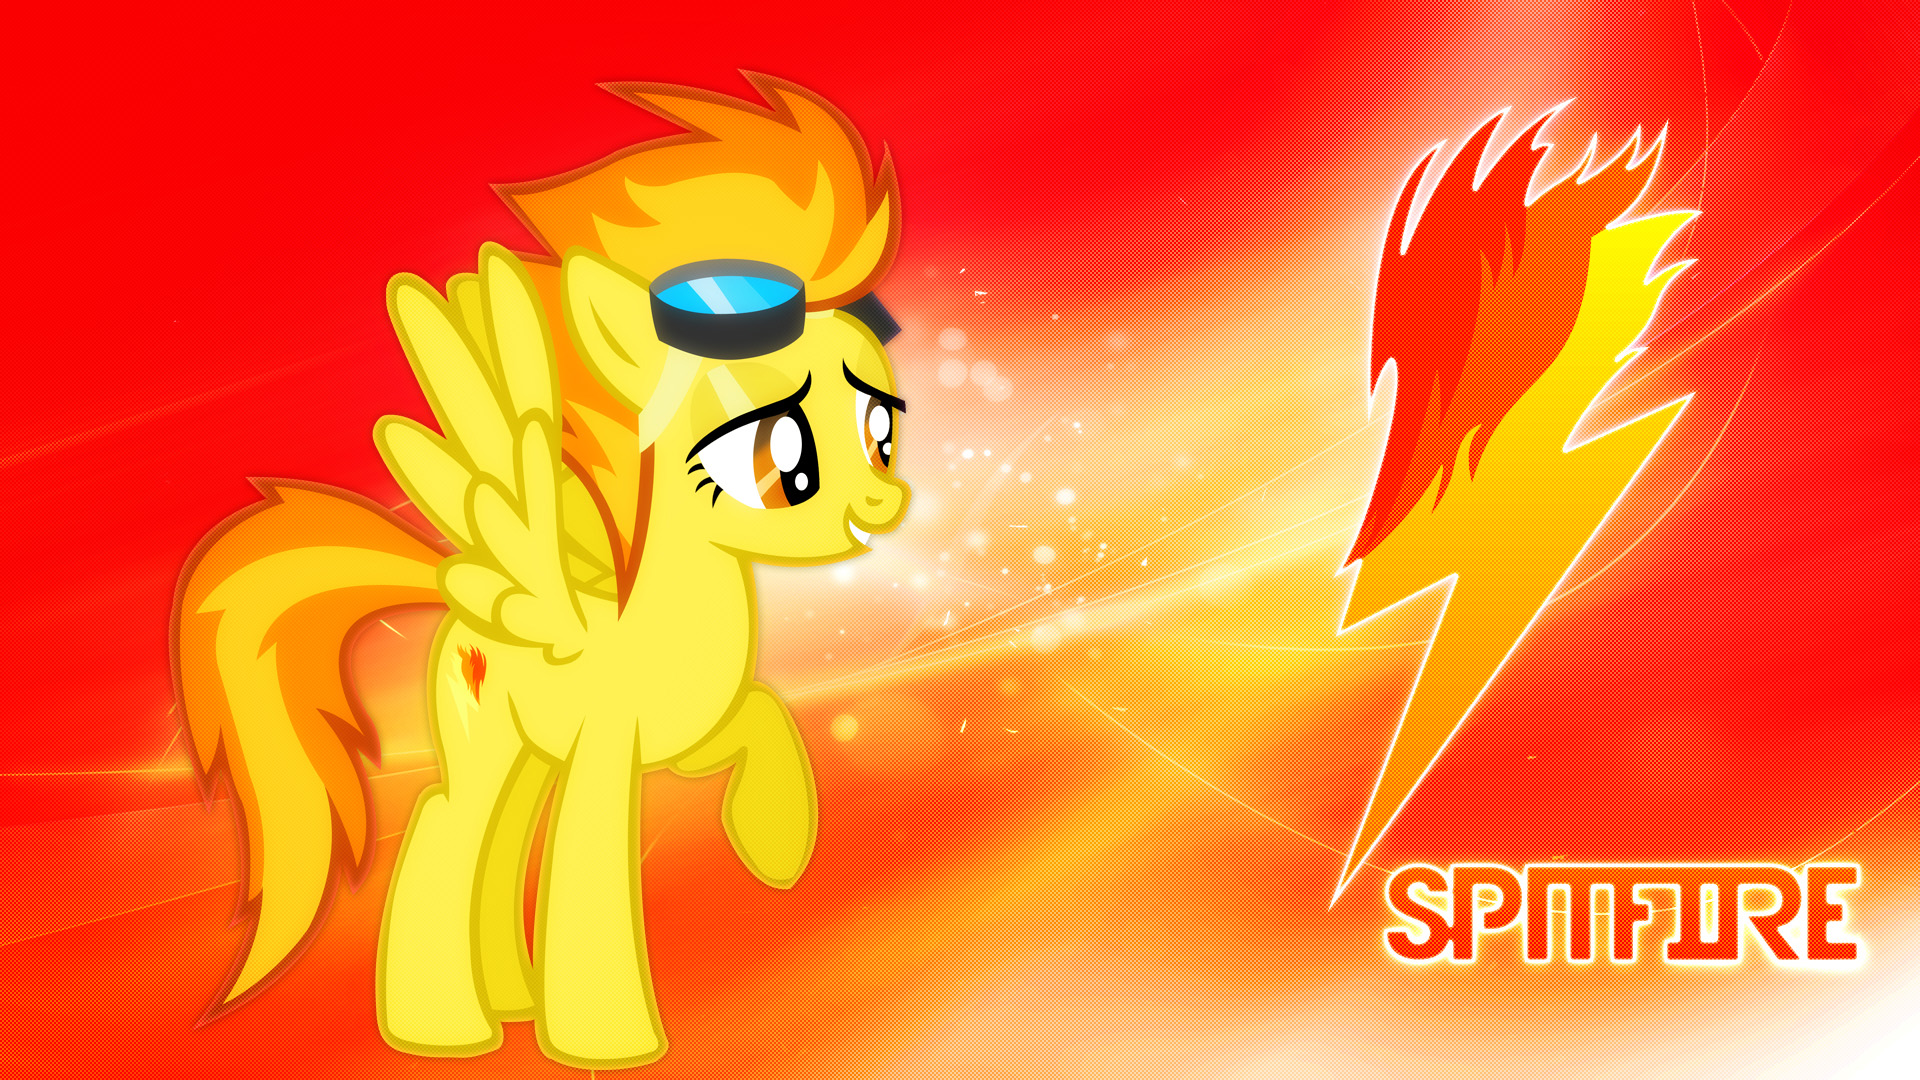 Spitfire Wallpaper 01 by Omega-Style